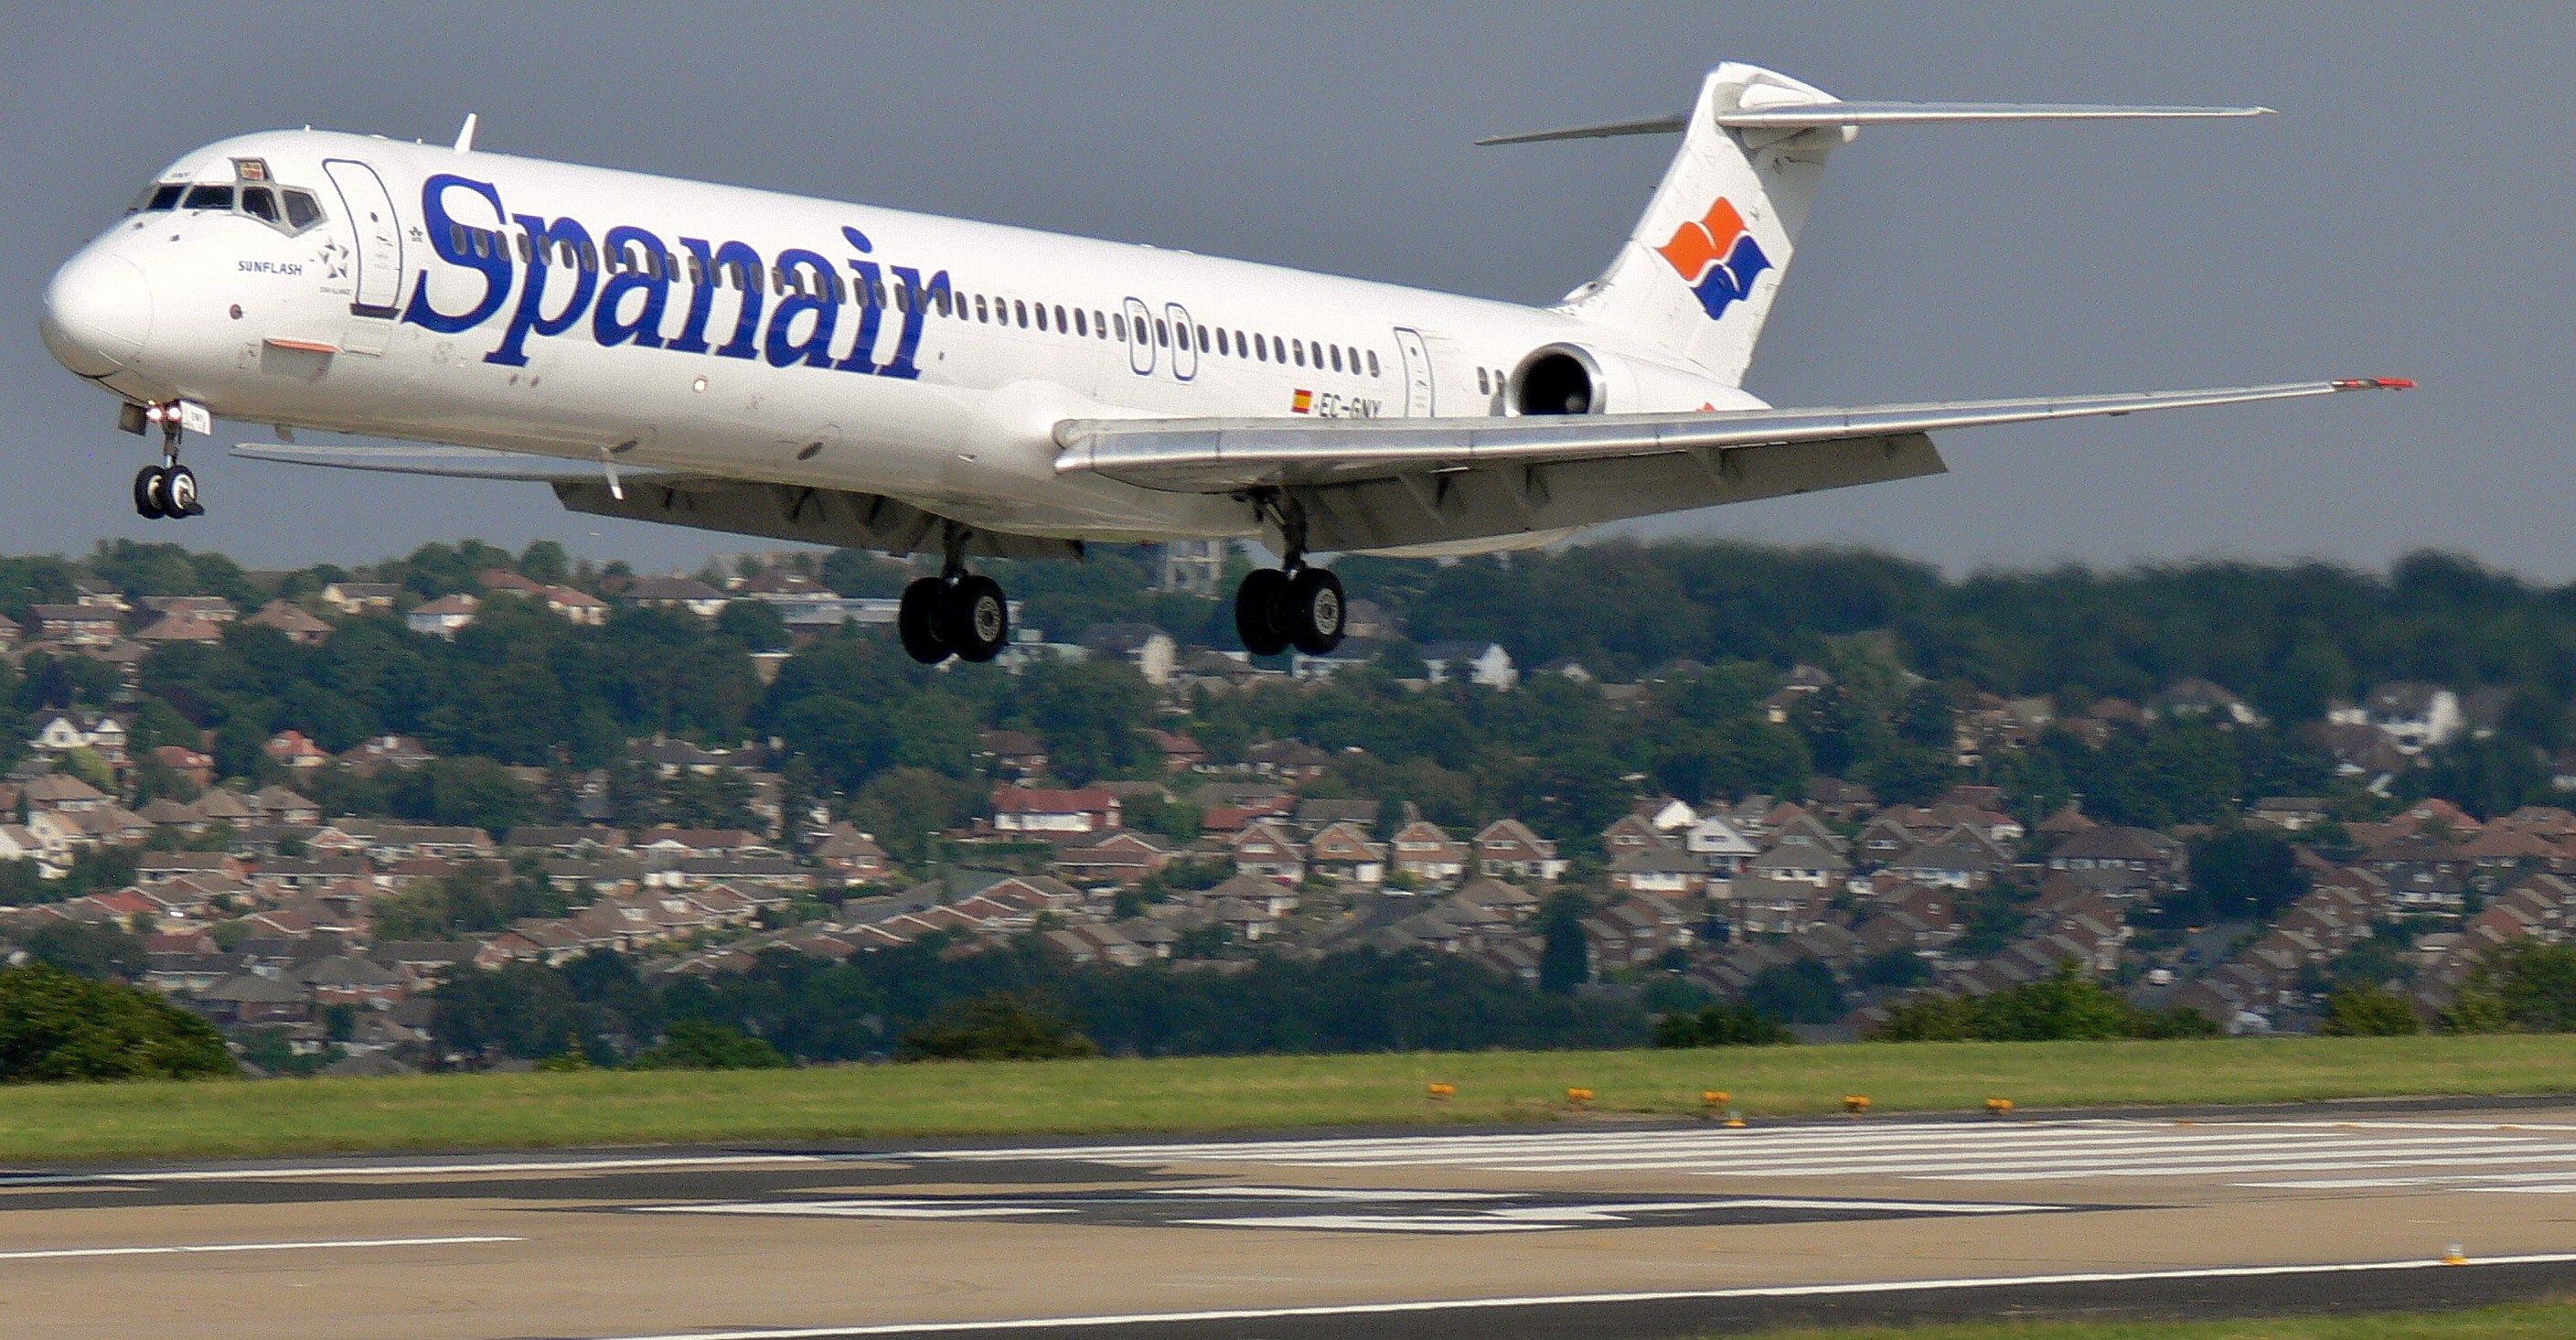 A Spanair MD-80 about to land on a runway.